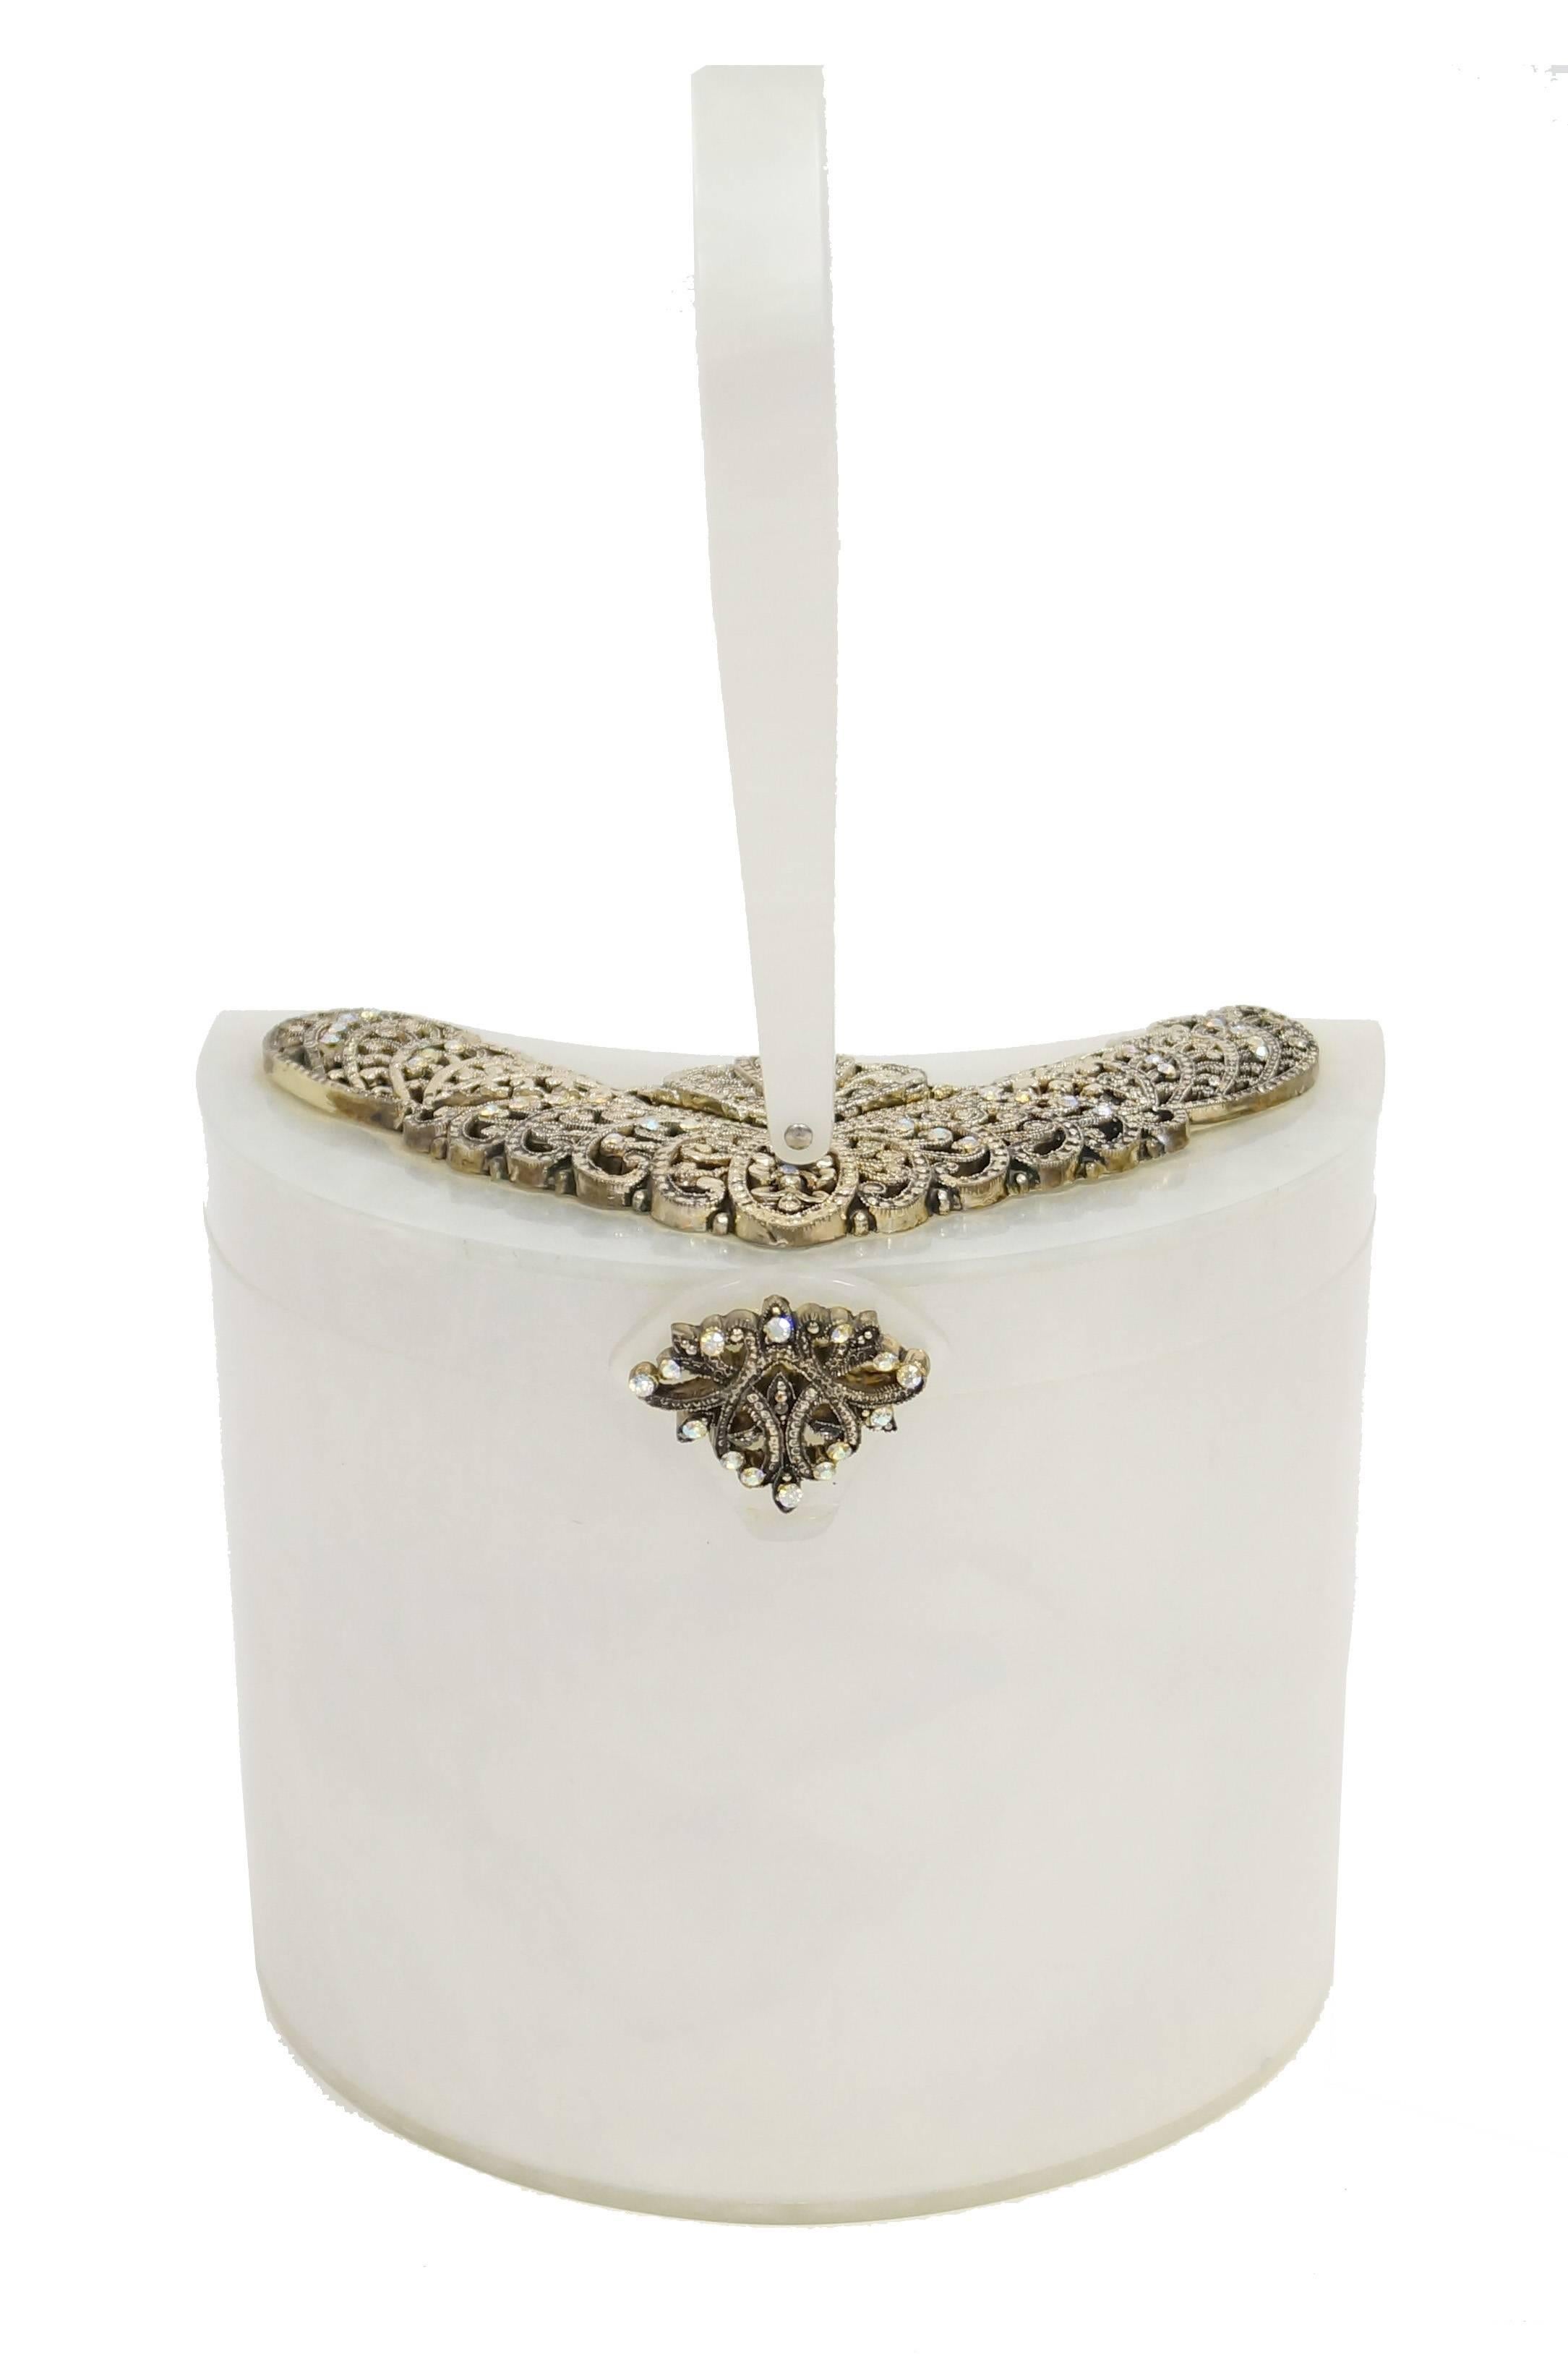 Gorgeous 1950s Wilardy Half Moon Pearlescent Lucite Box Purse.  This purse features a crescent - shaped body, with structured loop handle, and shallow lid. The lid and clasp are  detailed with metalwork featuring floral flourishes and iridescent